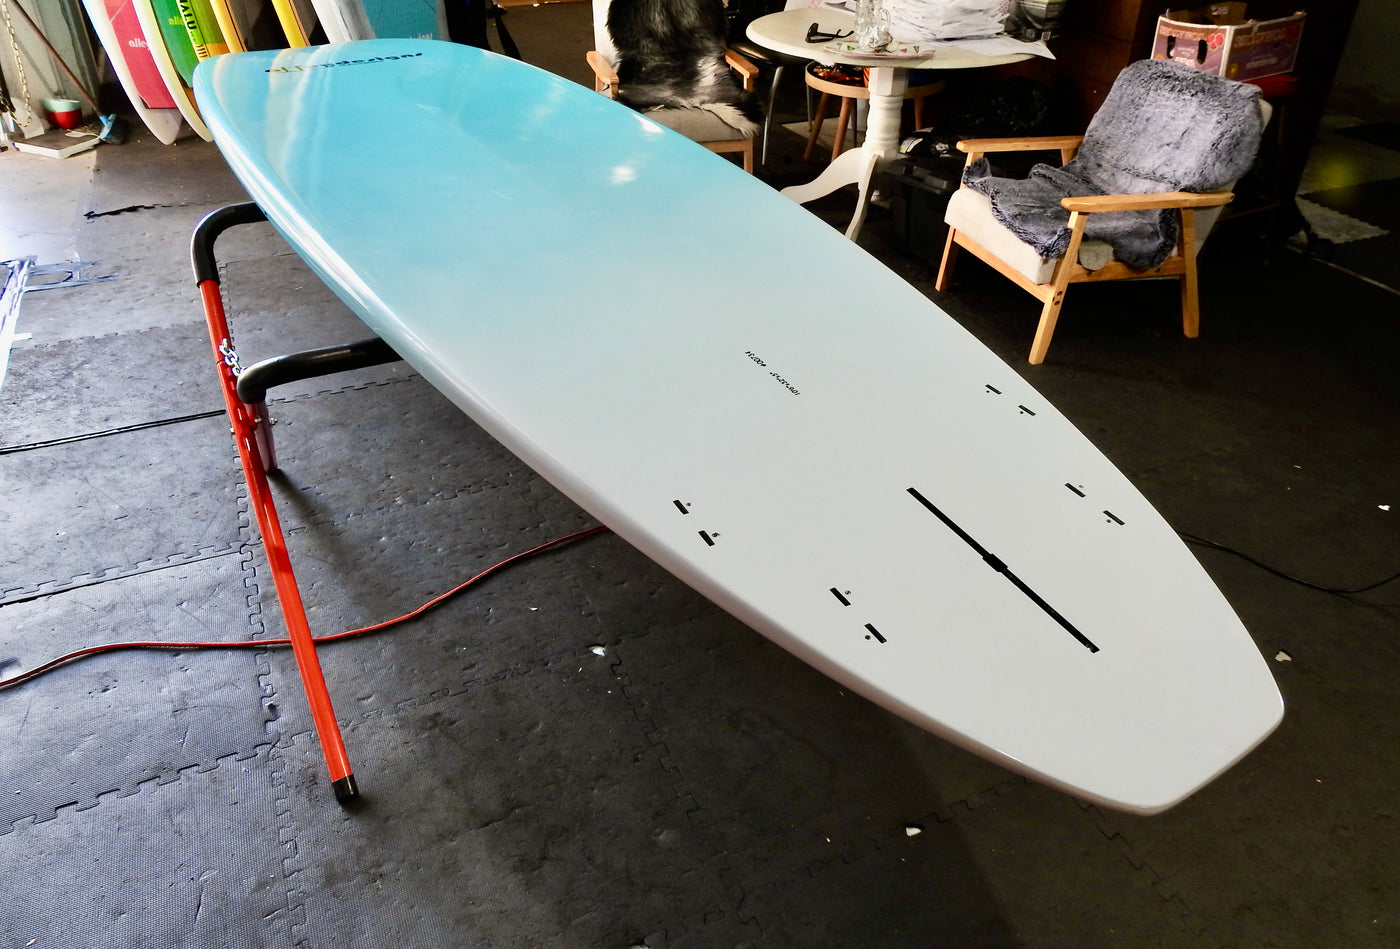 10'6" x 32" Timber & Teal Classic Alleydesigns SUP 11kg - Alleydesigns  Pty Ltd                                             ABN: 44165571264